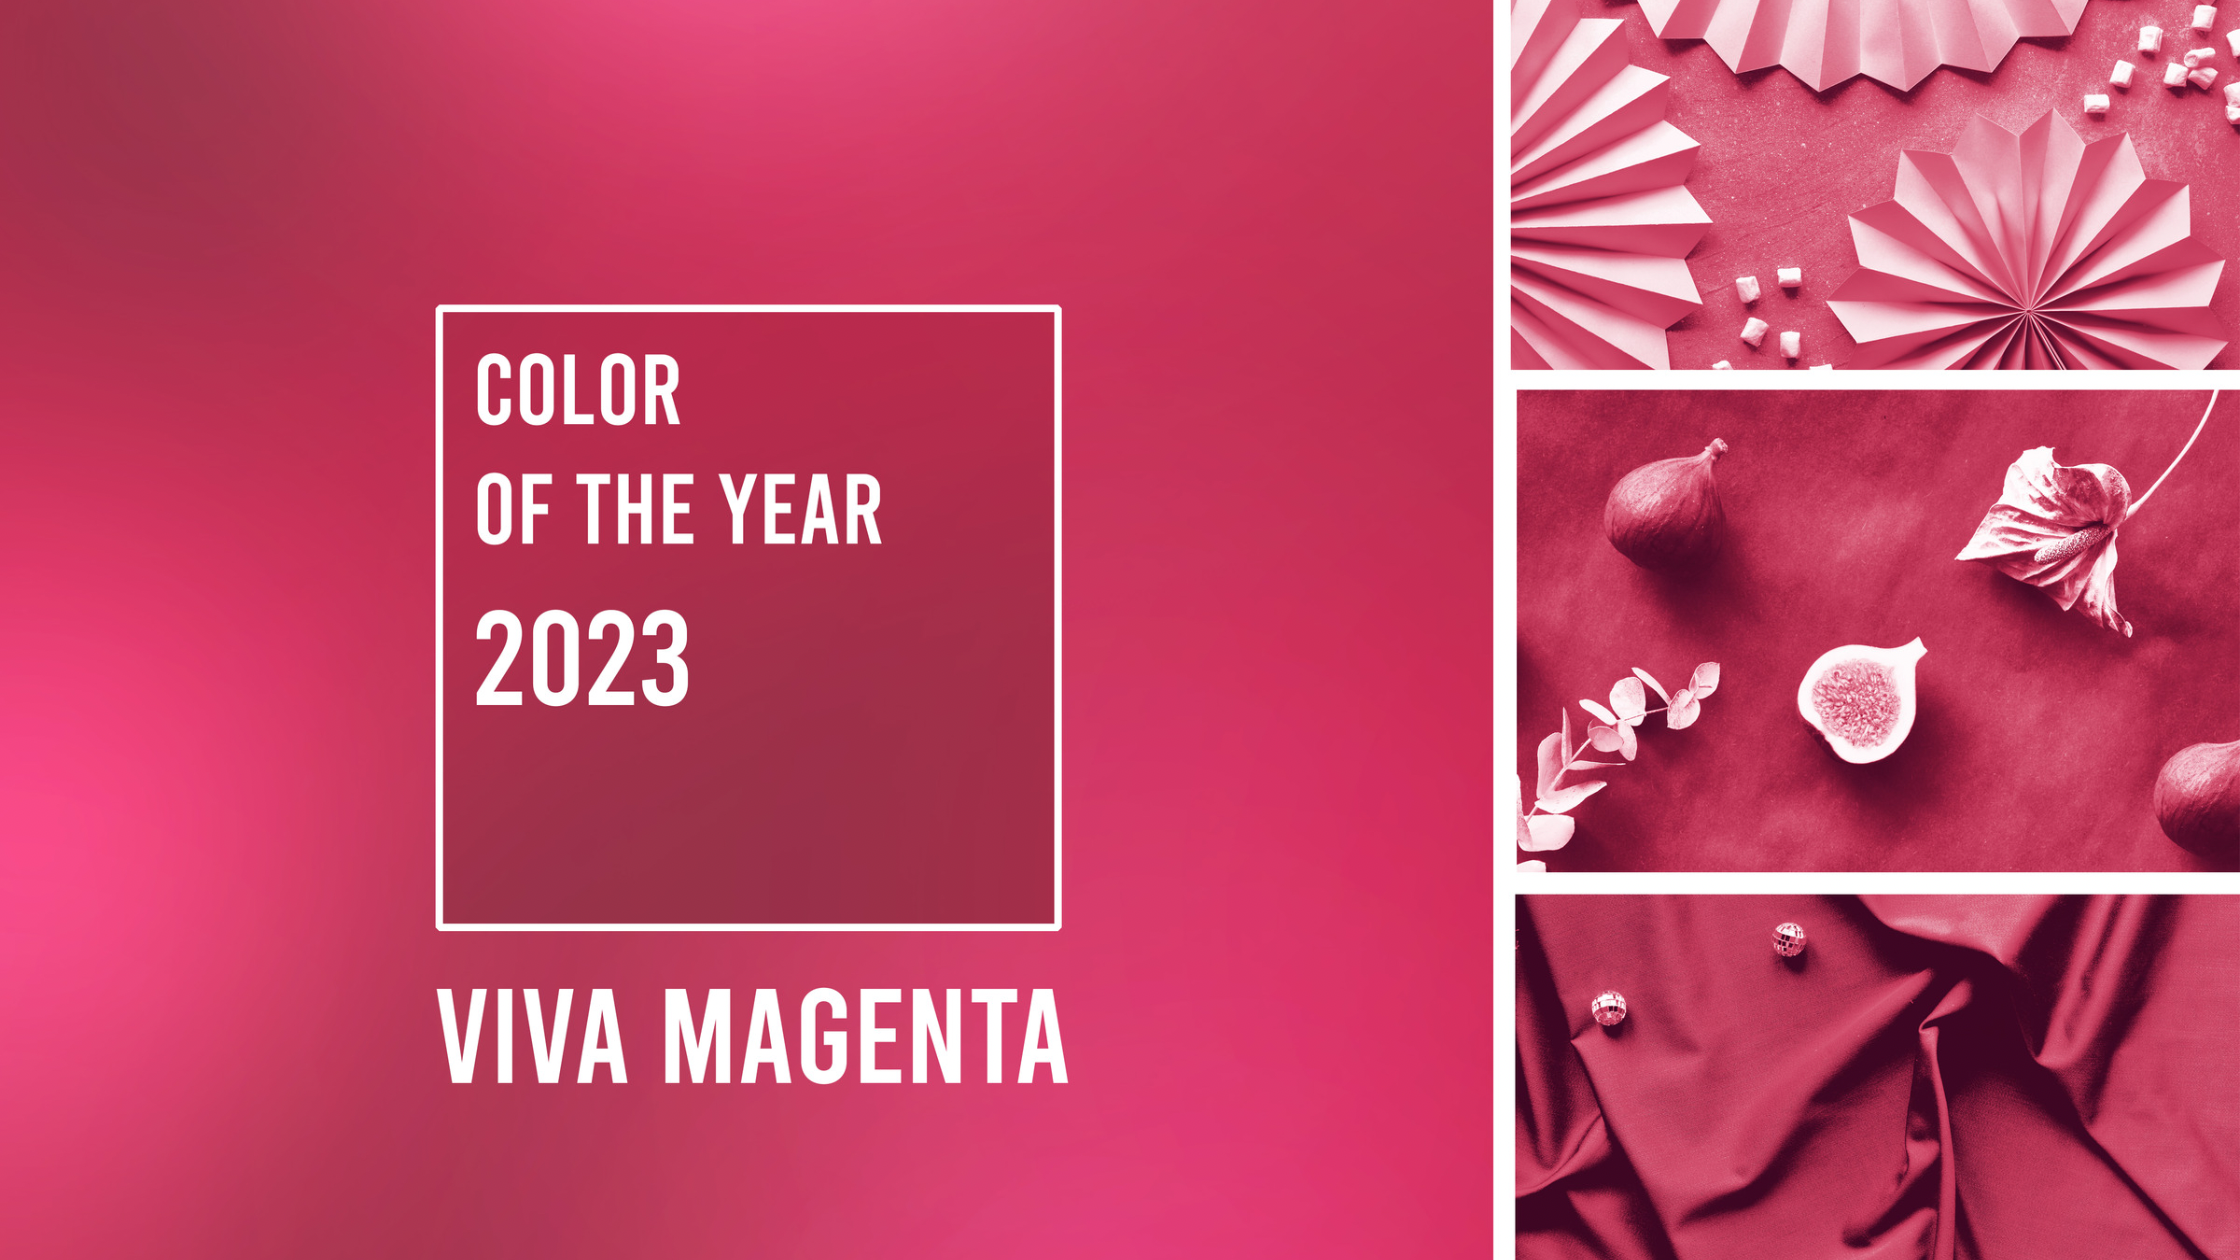 How to Accessorize Using the 2023 Pantone Color of the Year - Viva Magenta